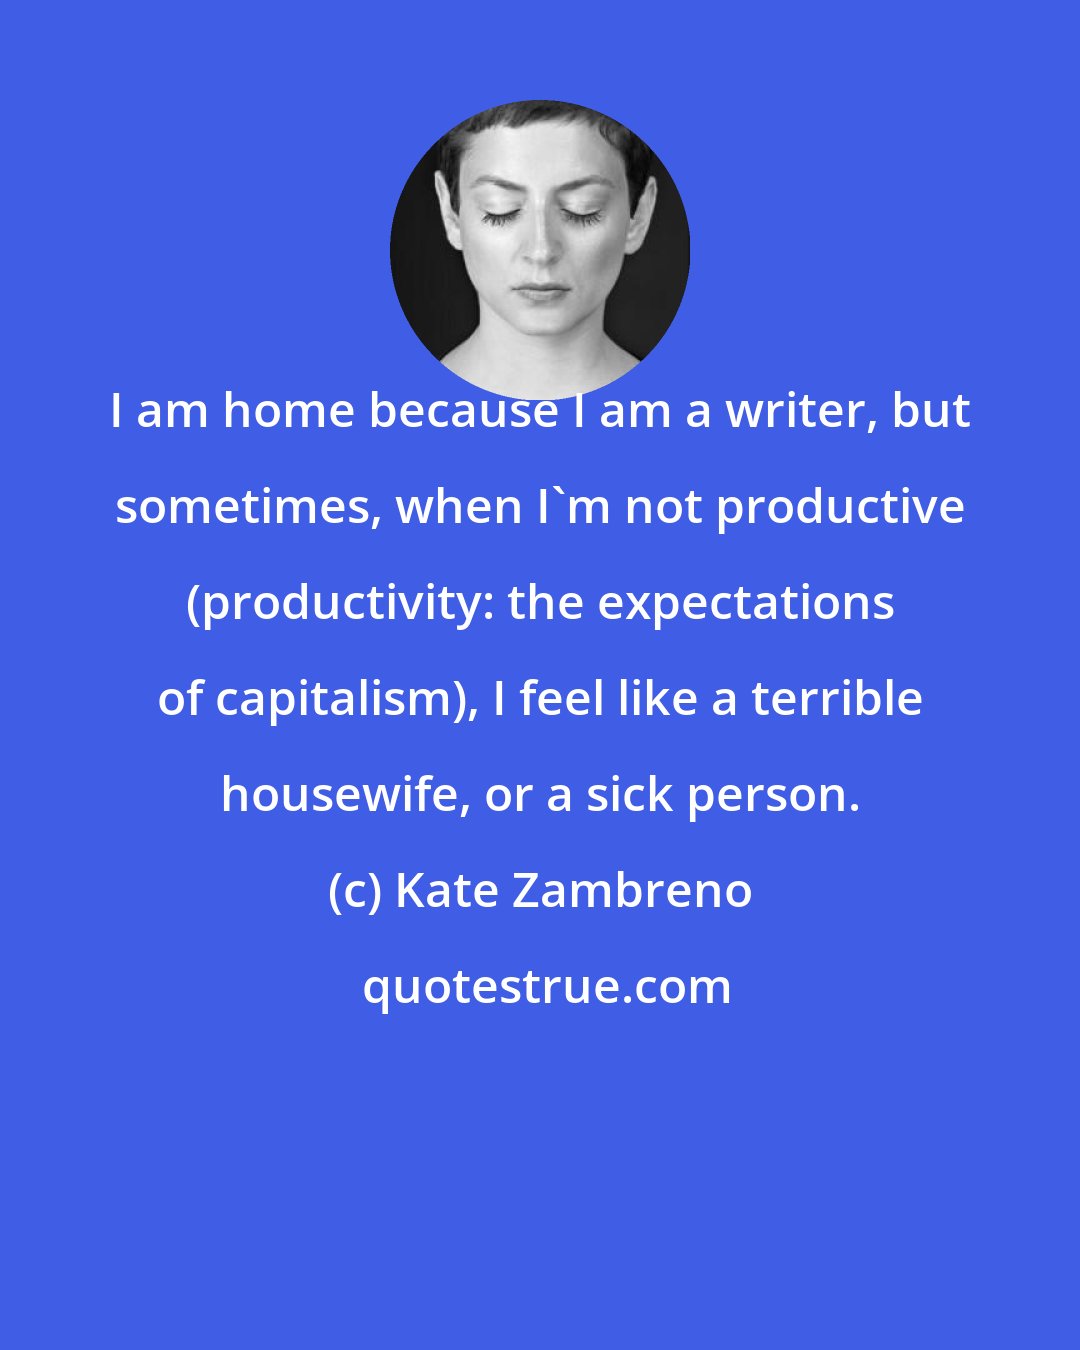 Kate Zambreno: I am home because I am a writer, but sometimes, when I'm not productive (productivity: the expectations of capitalism), I feel like a terrible housewife, or a sick person.